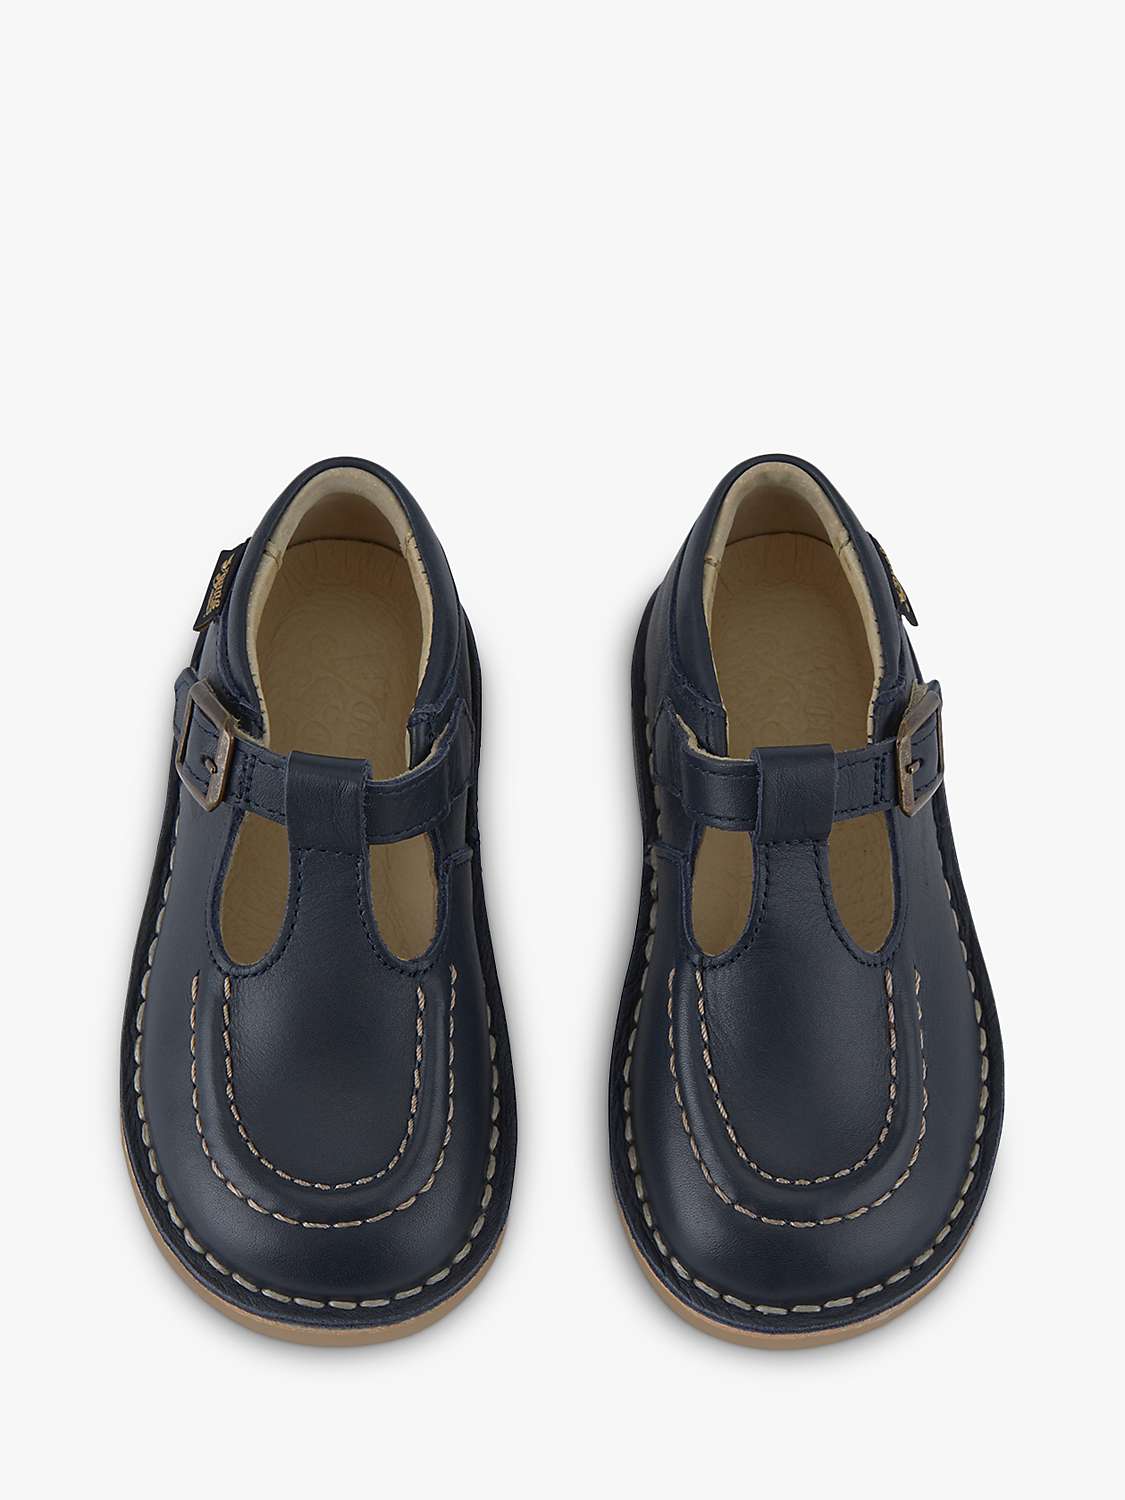 Buy Young Soles Kids' Parker T-Bar Leather Shoes Online at johnlewis.com